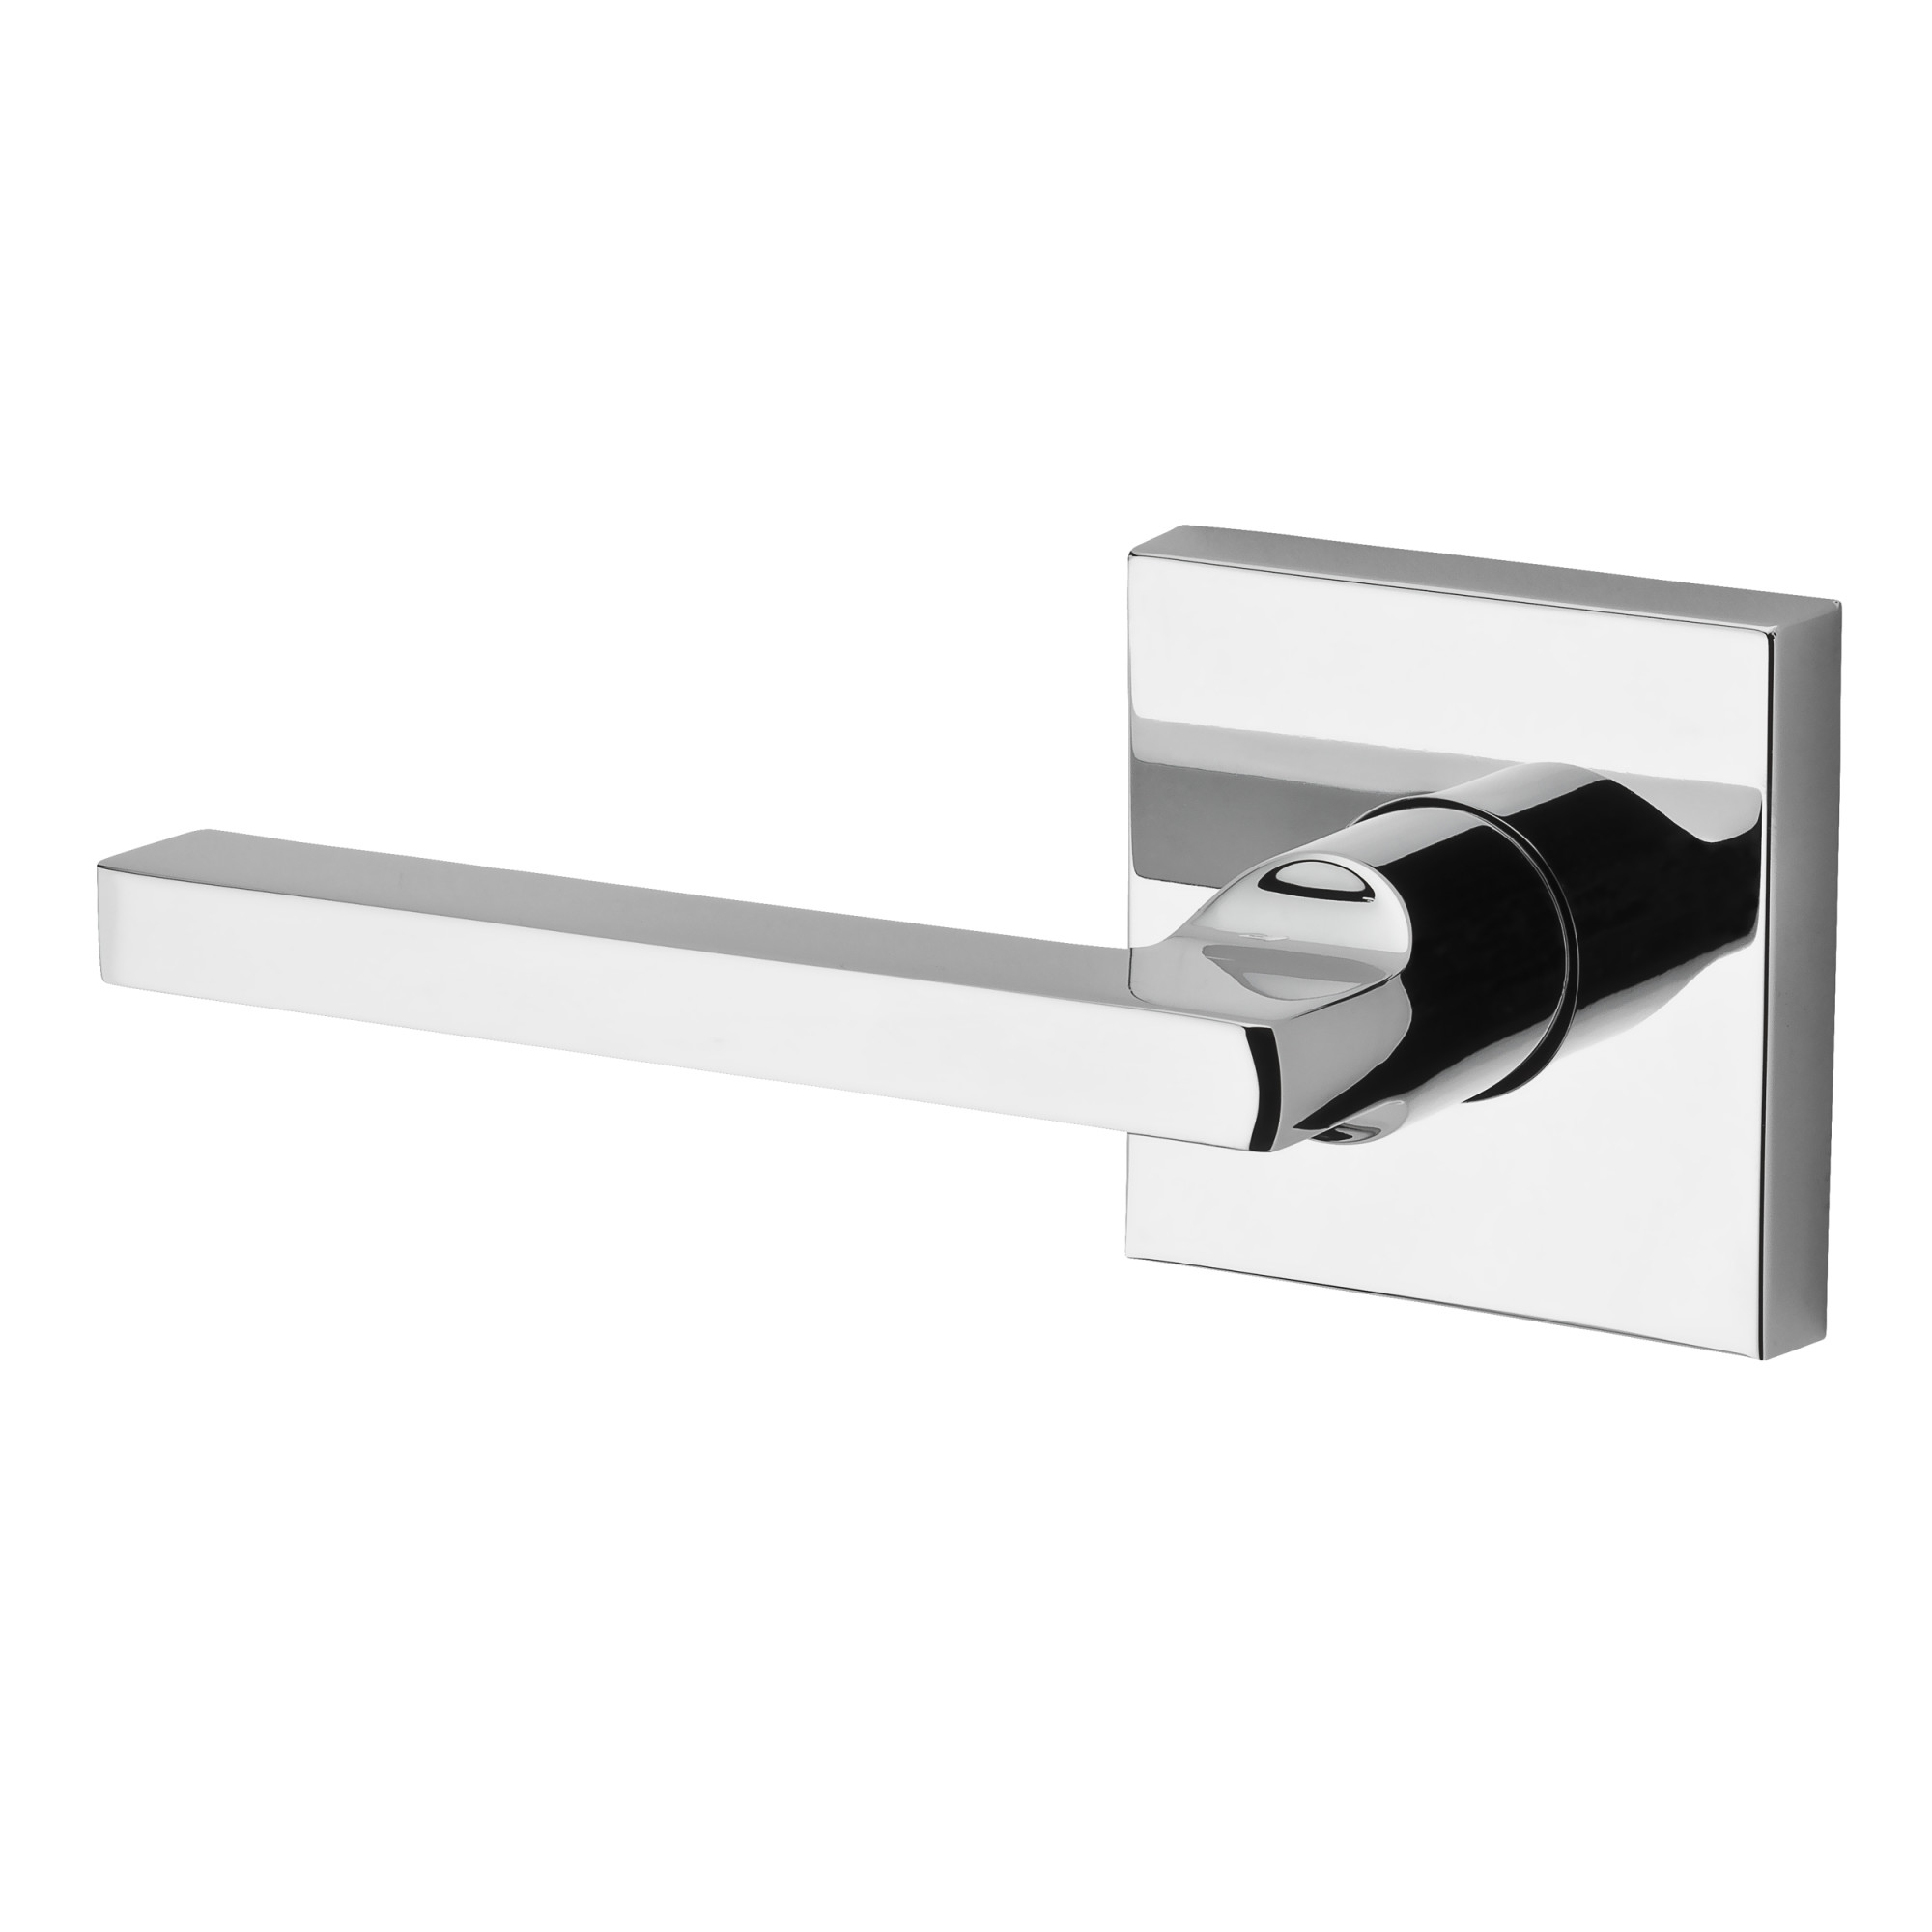 Baldwin Reserve HDSQULCSR260 Door Handle Sets Half Dummy Left Hand Square Lever and Contemporary Rose Bright Chrome Finish - image 1 of 2